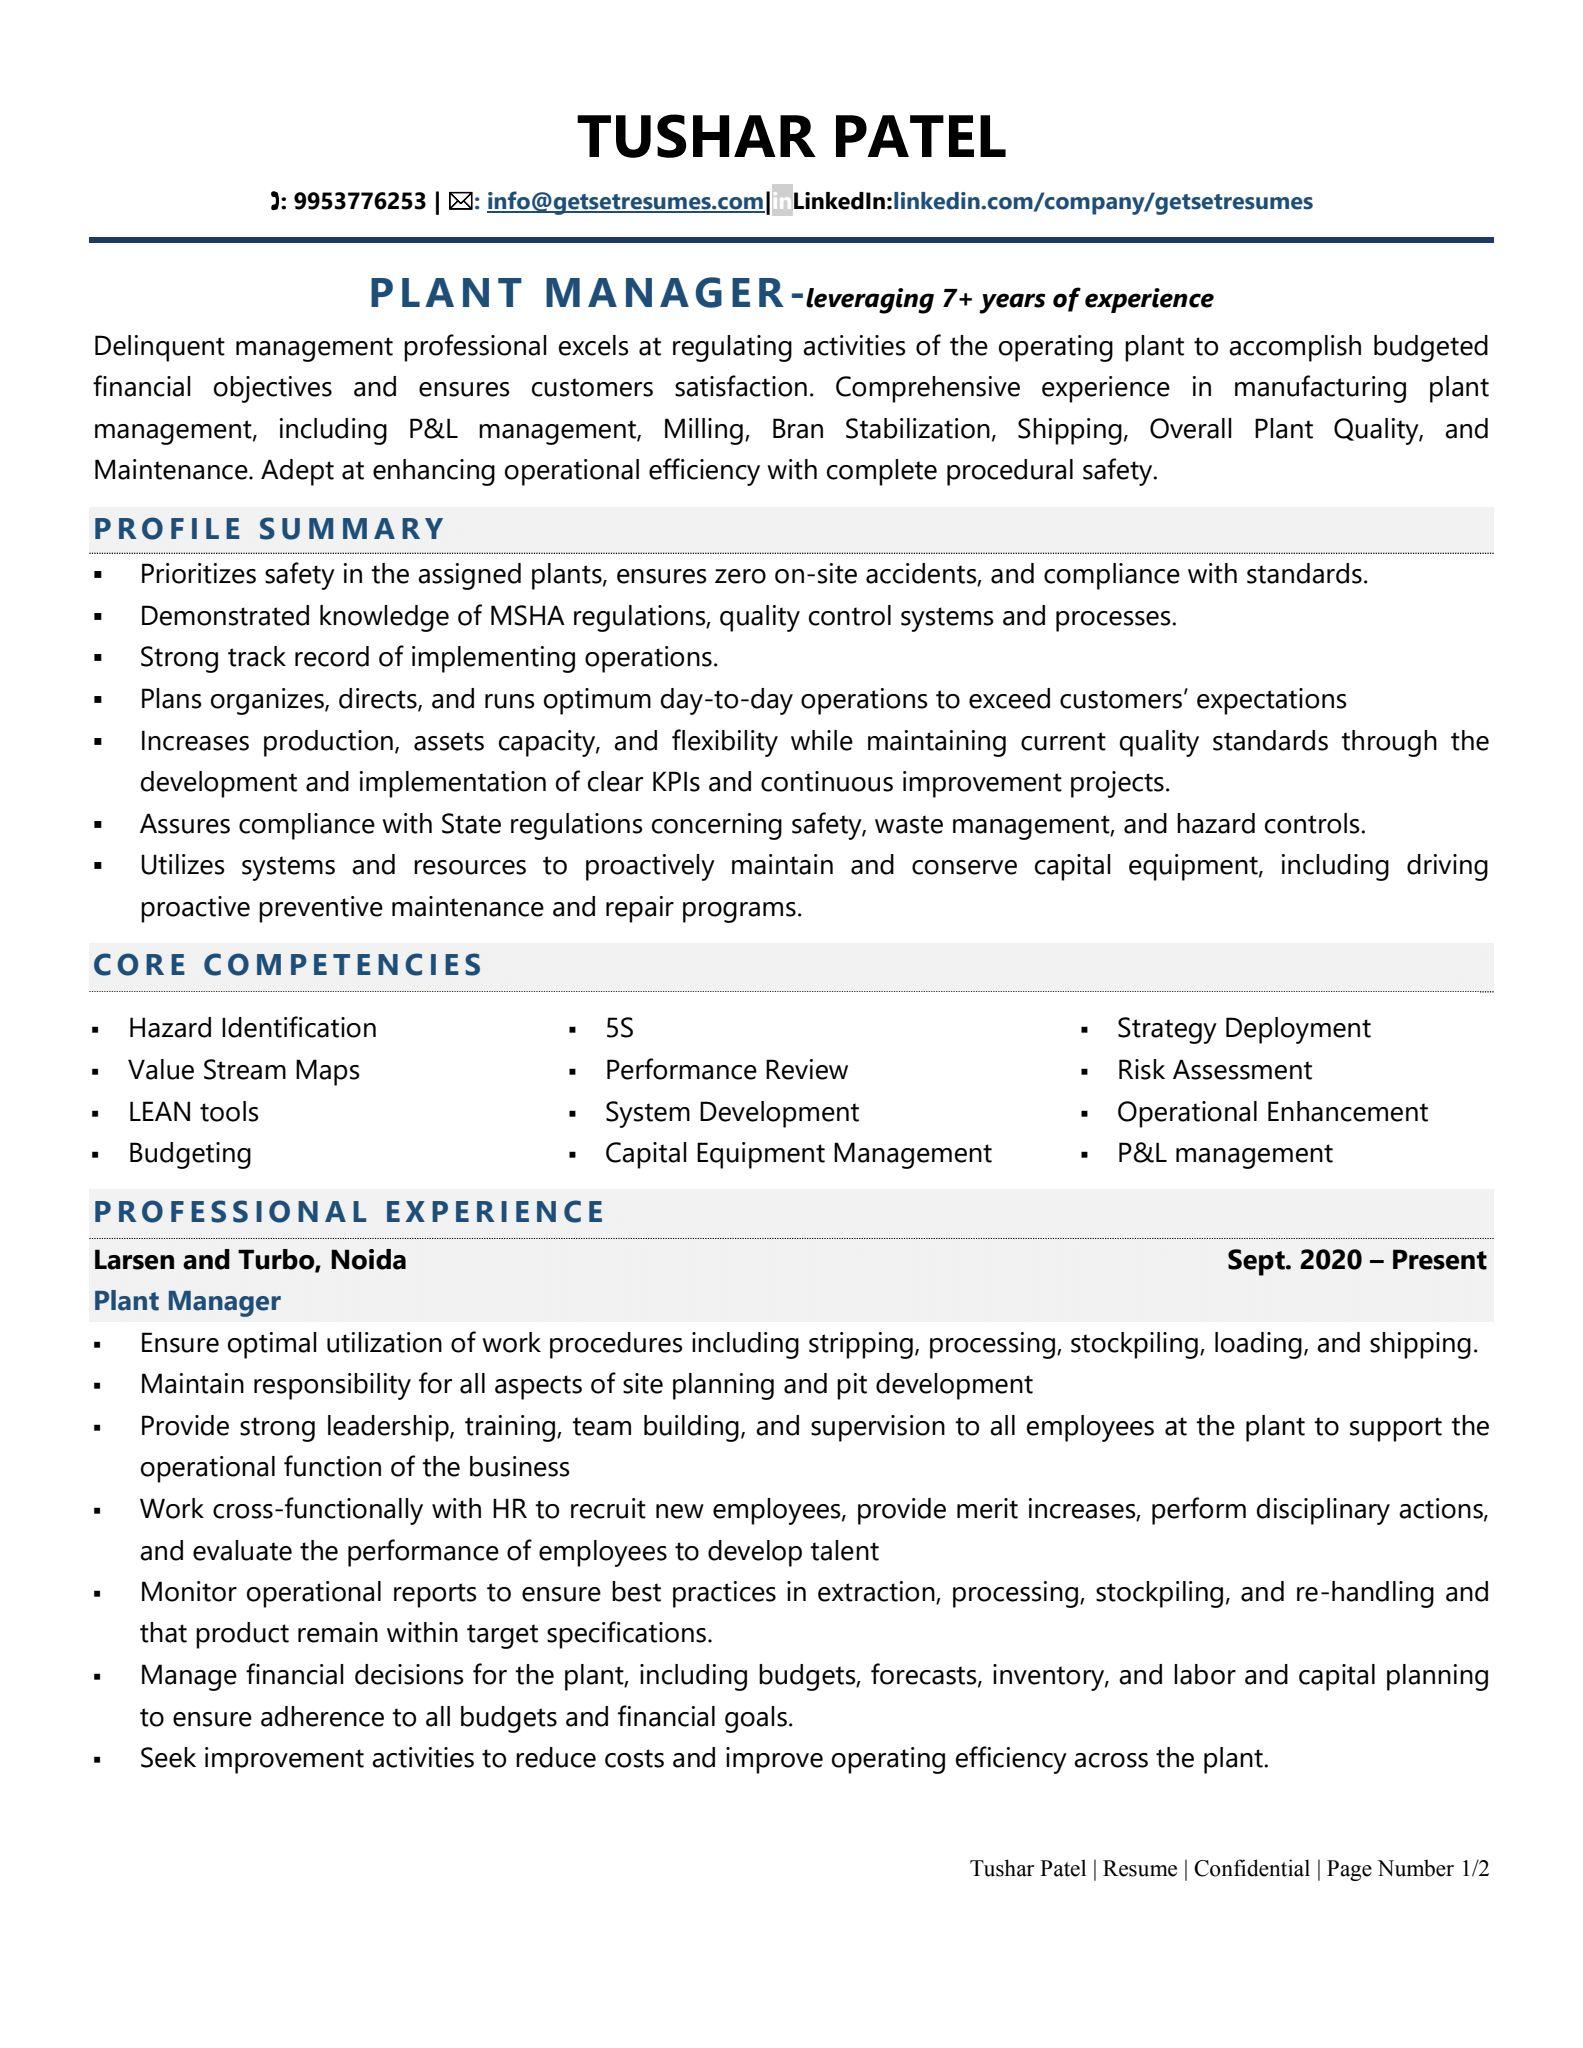 Plant Manager - Resume Example & Template